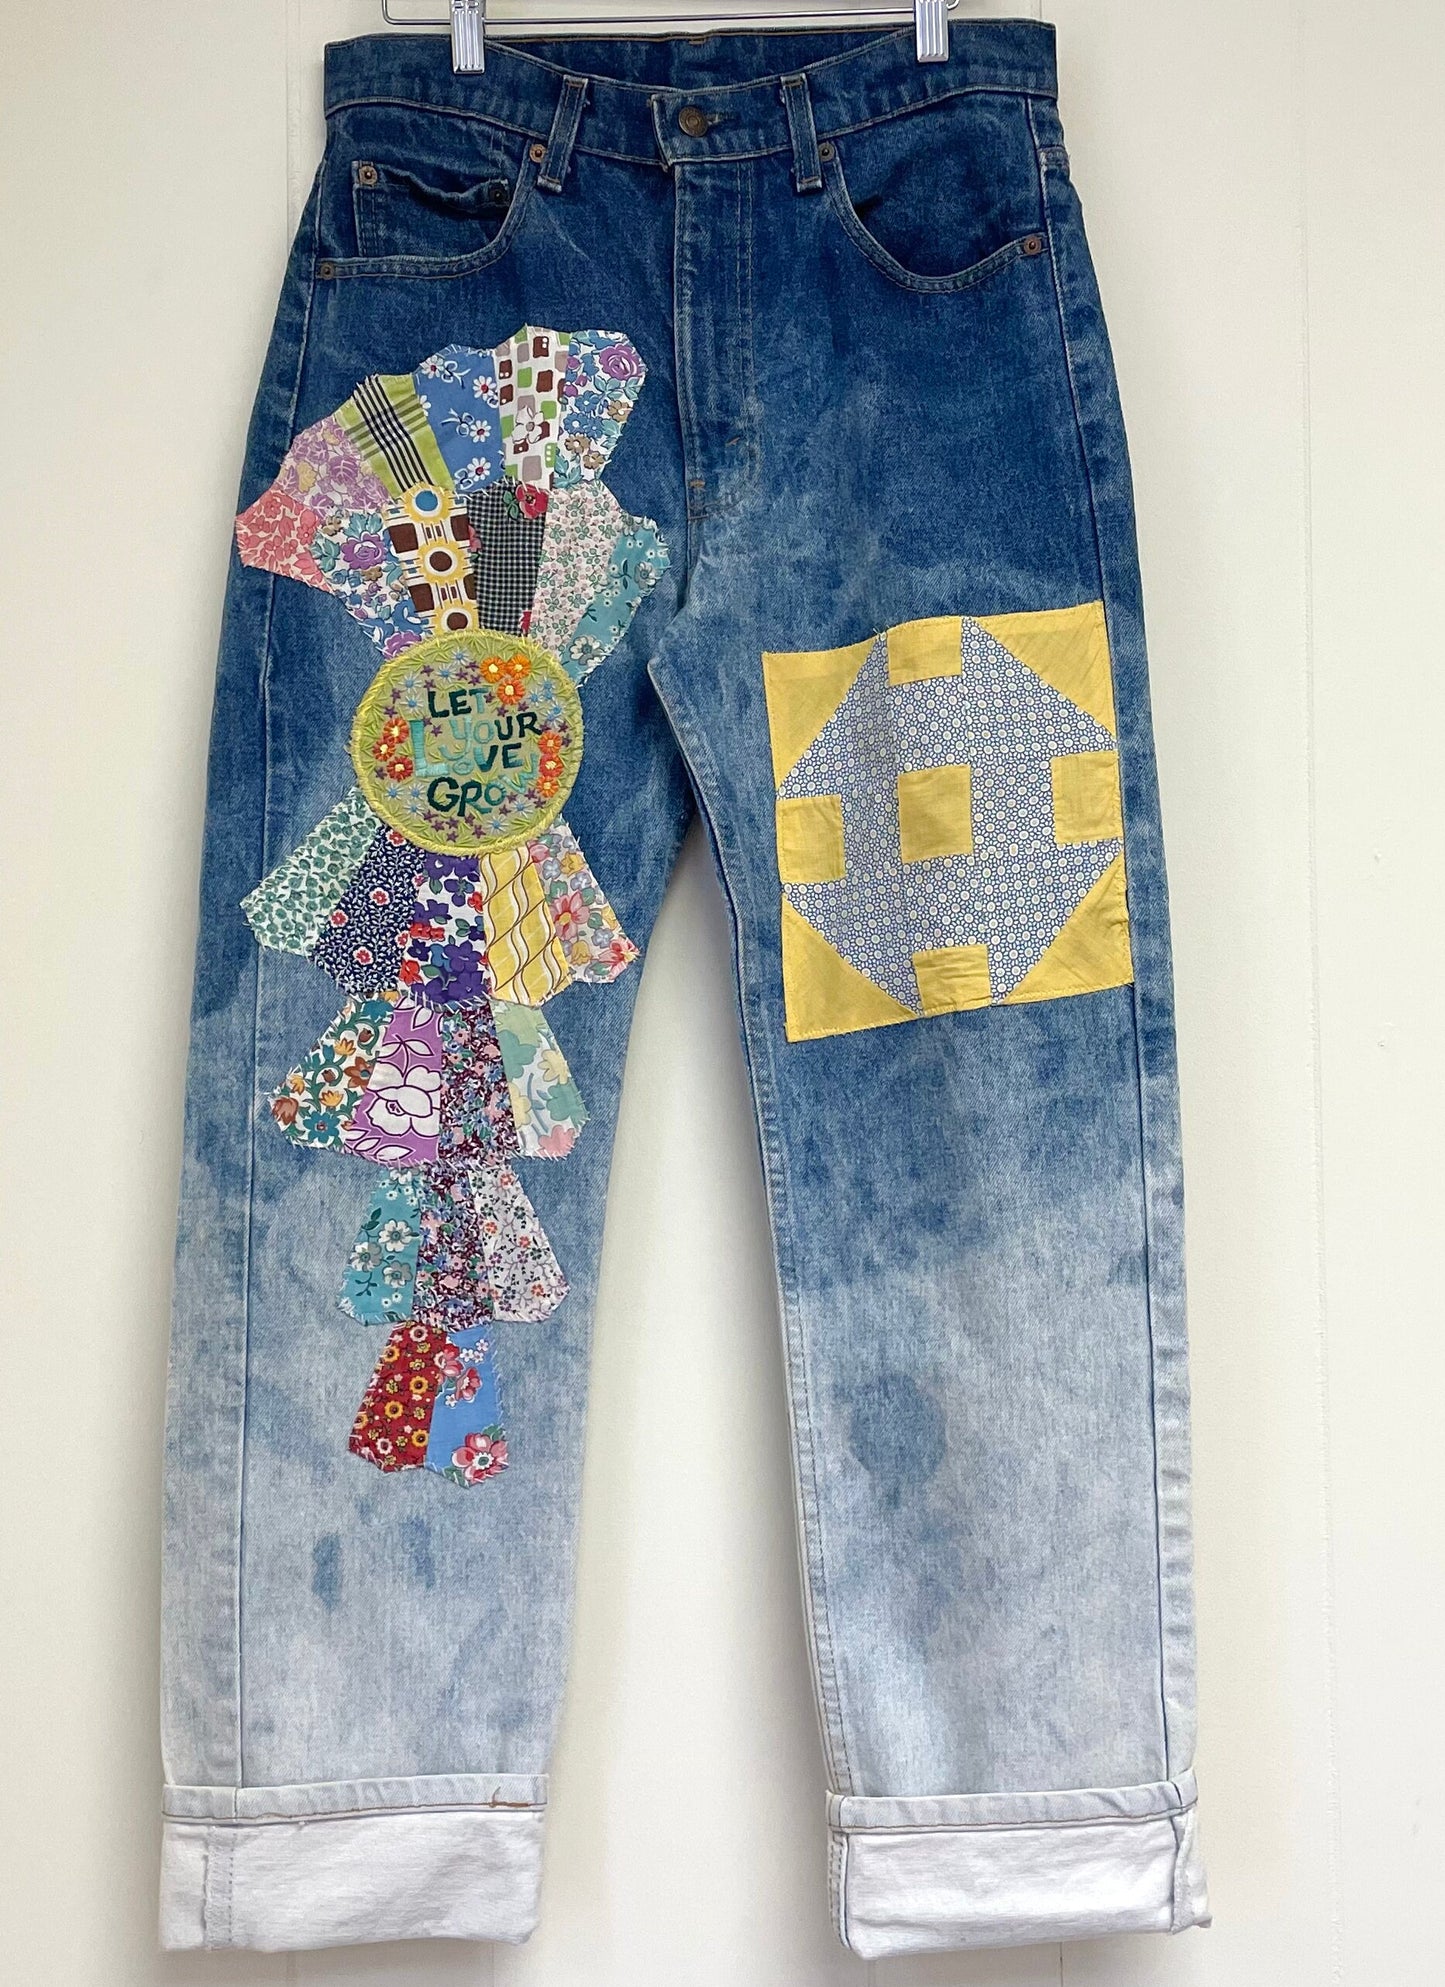 a pair of jeans with patches on them hanging on a wall